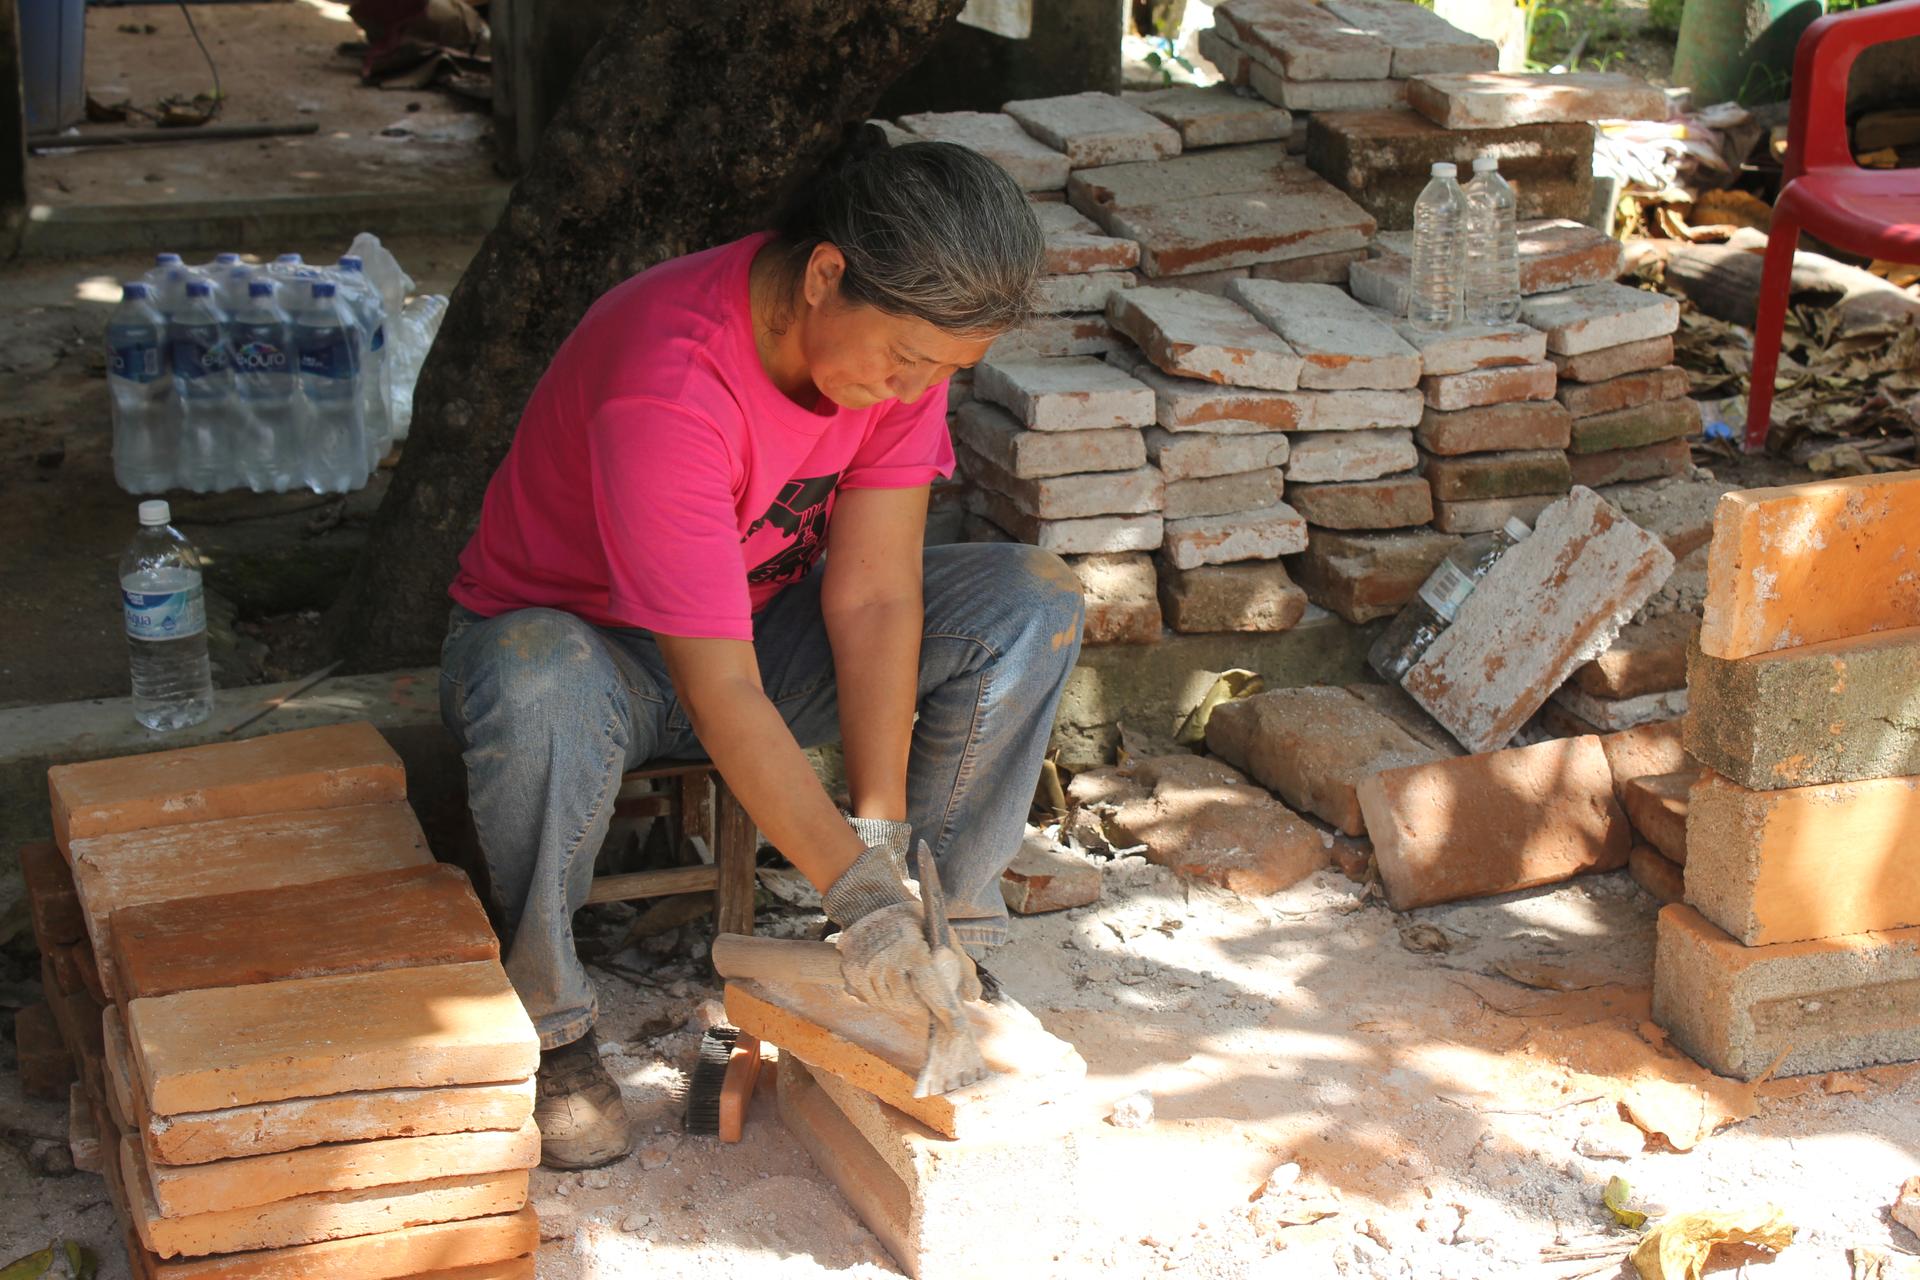 A woman scrapes mortar off of a salvaged brick with a flat end of a chisel so the brick can be reused.